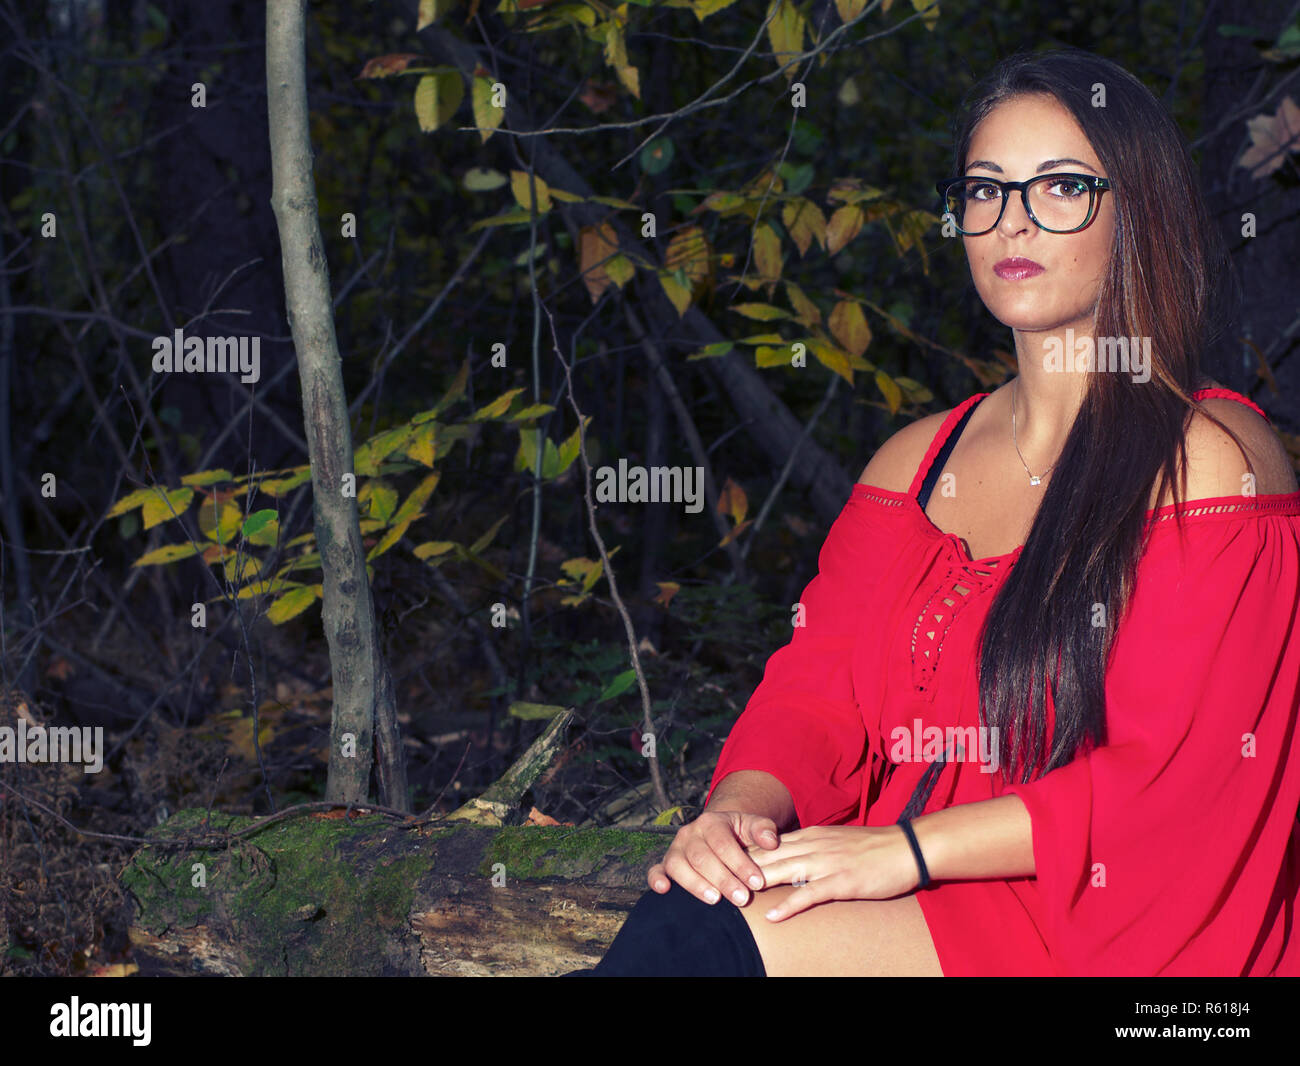 young women stiting in the forest wearing red dress and glasses Stock Photo